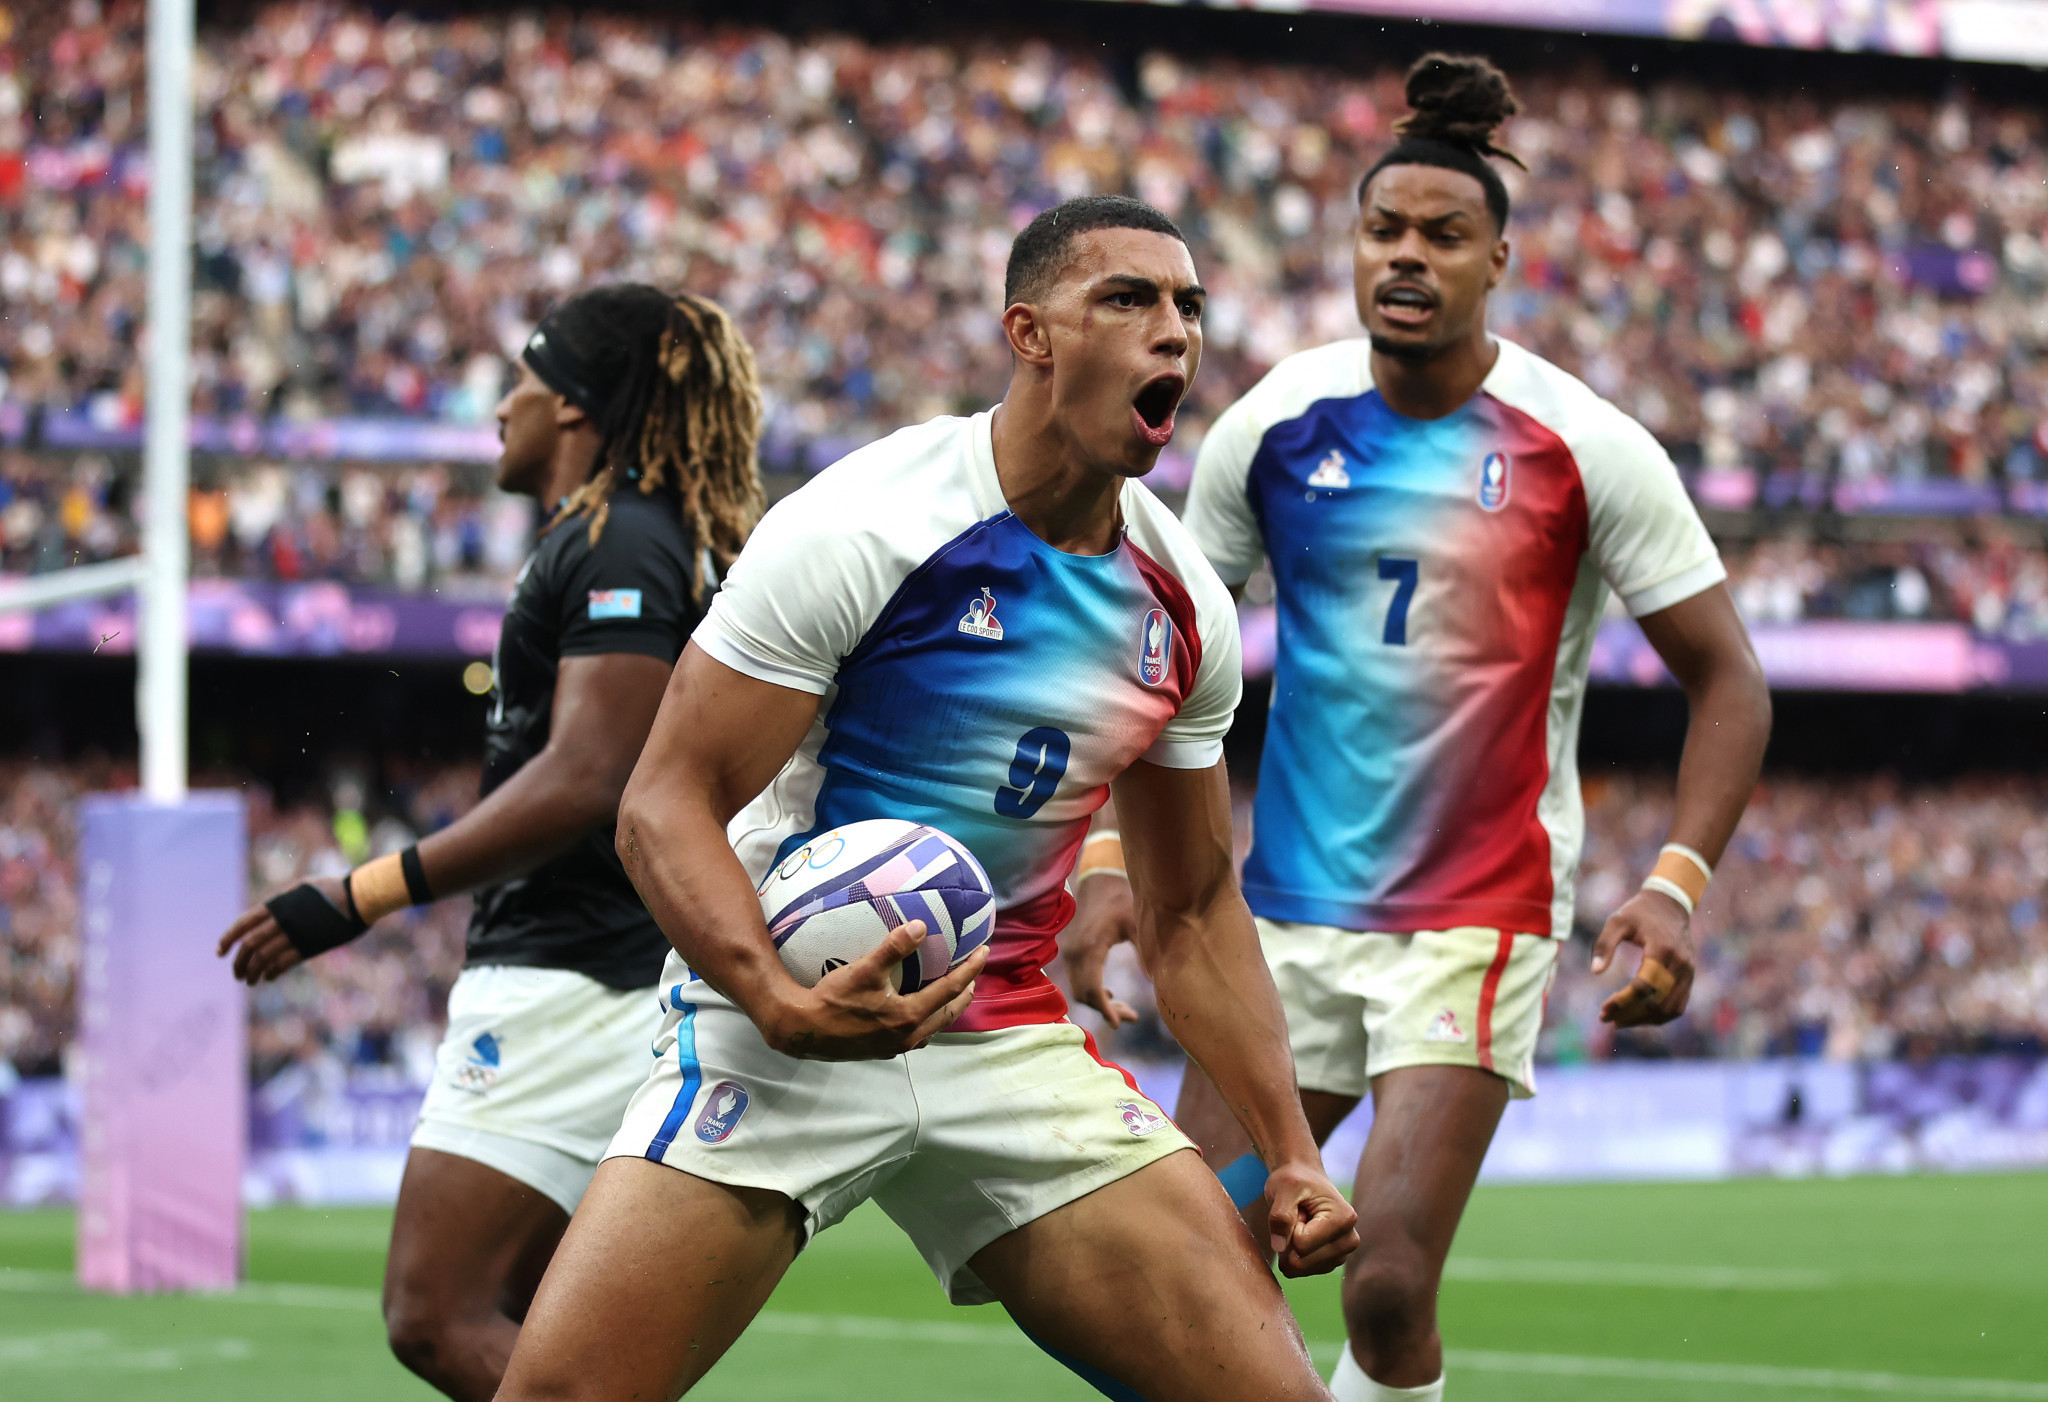 Rugby sevens has seen a remarkable rise in Paris. GETTY IMAGES